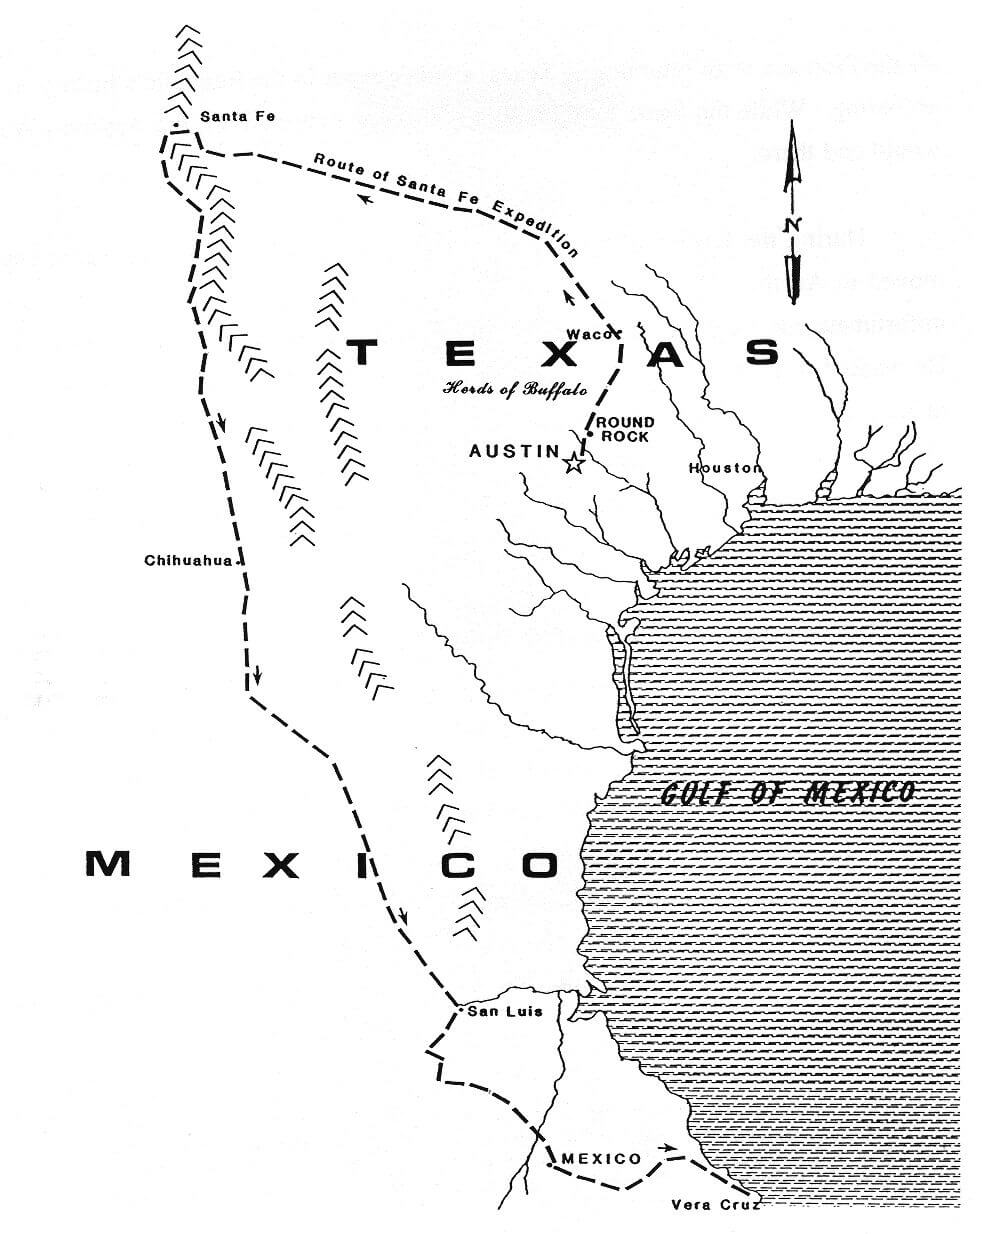 Route of the Santa Fe Expedition (based on Loomis).